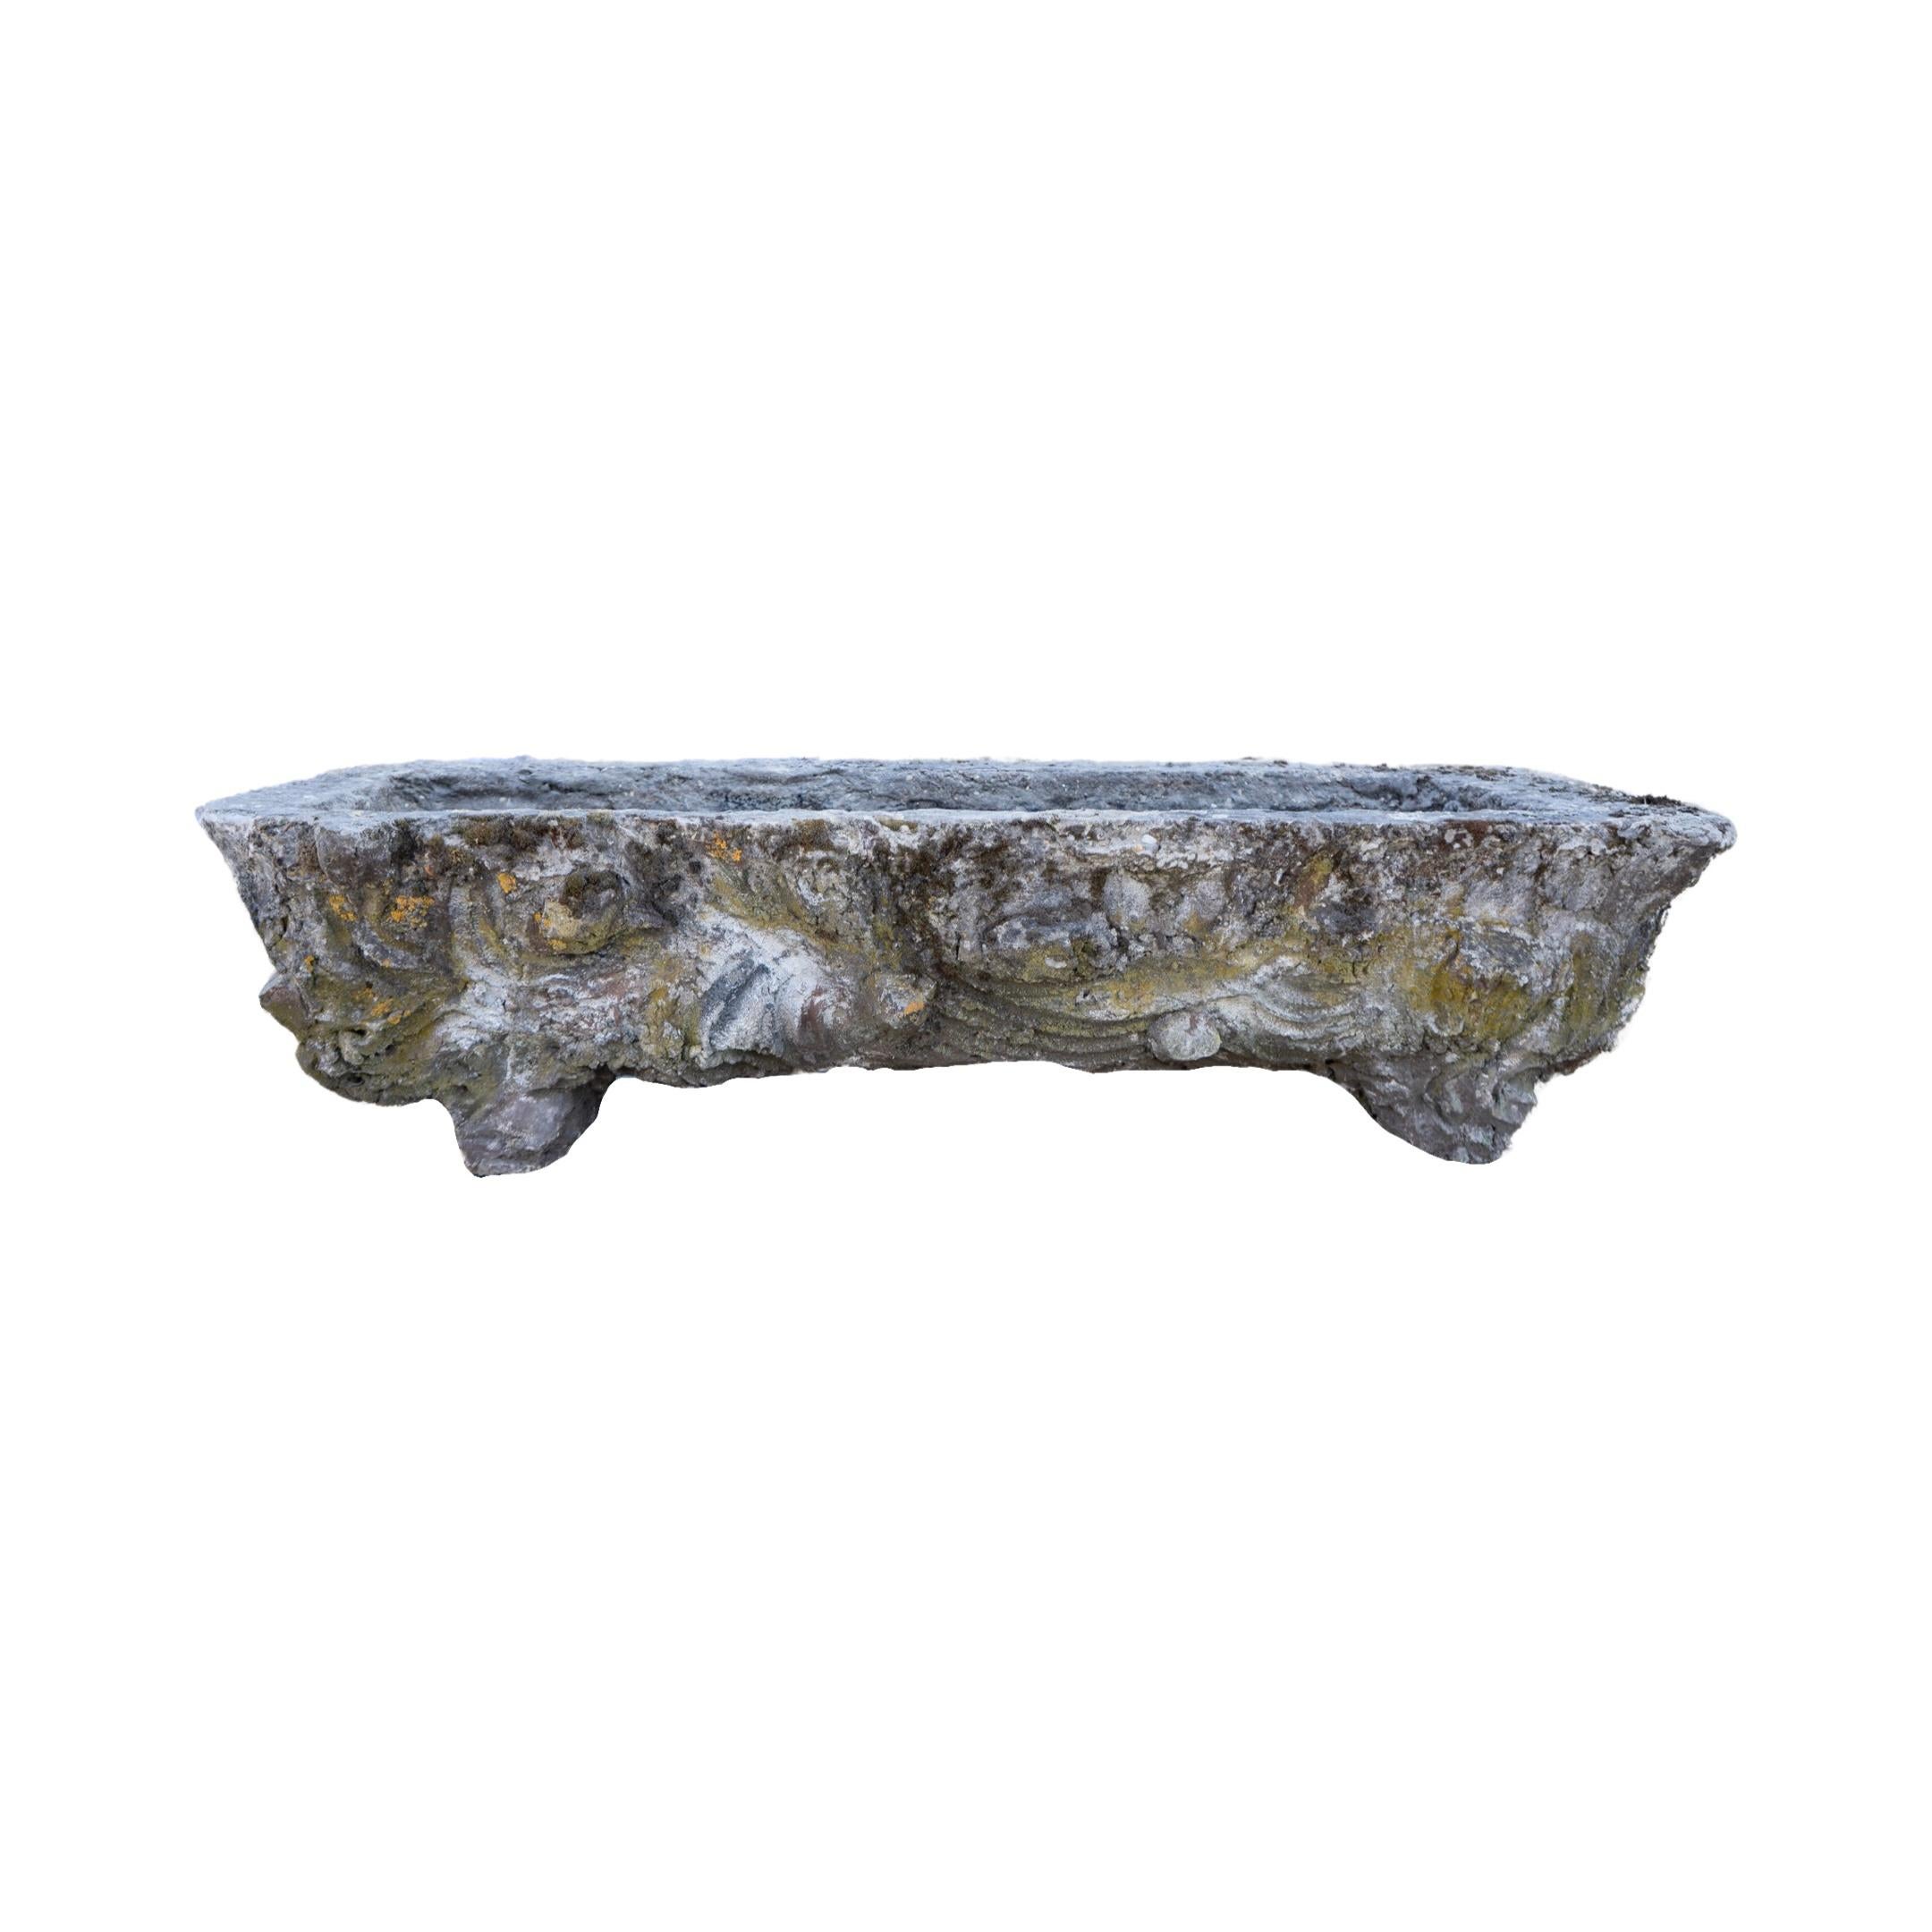 This French Faux Bois Limestone Trough, originating from 1900s France, boasts a stunning faux wood design crafted from durable limestone. Perfect for adding a touch of historic elegance to any outdoor space.